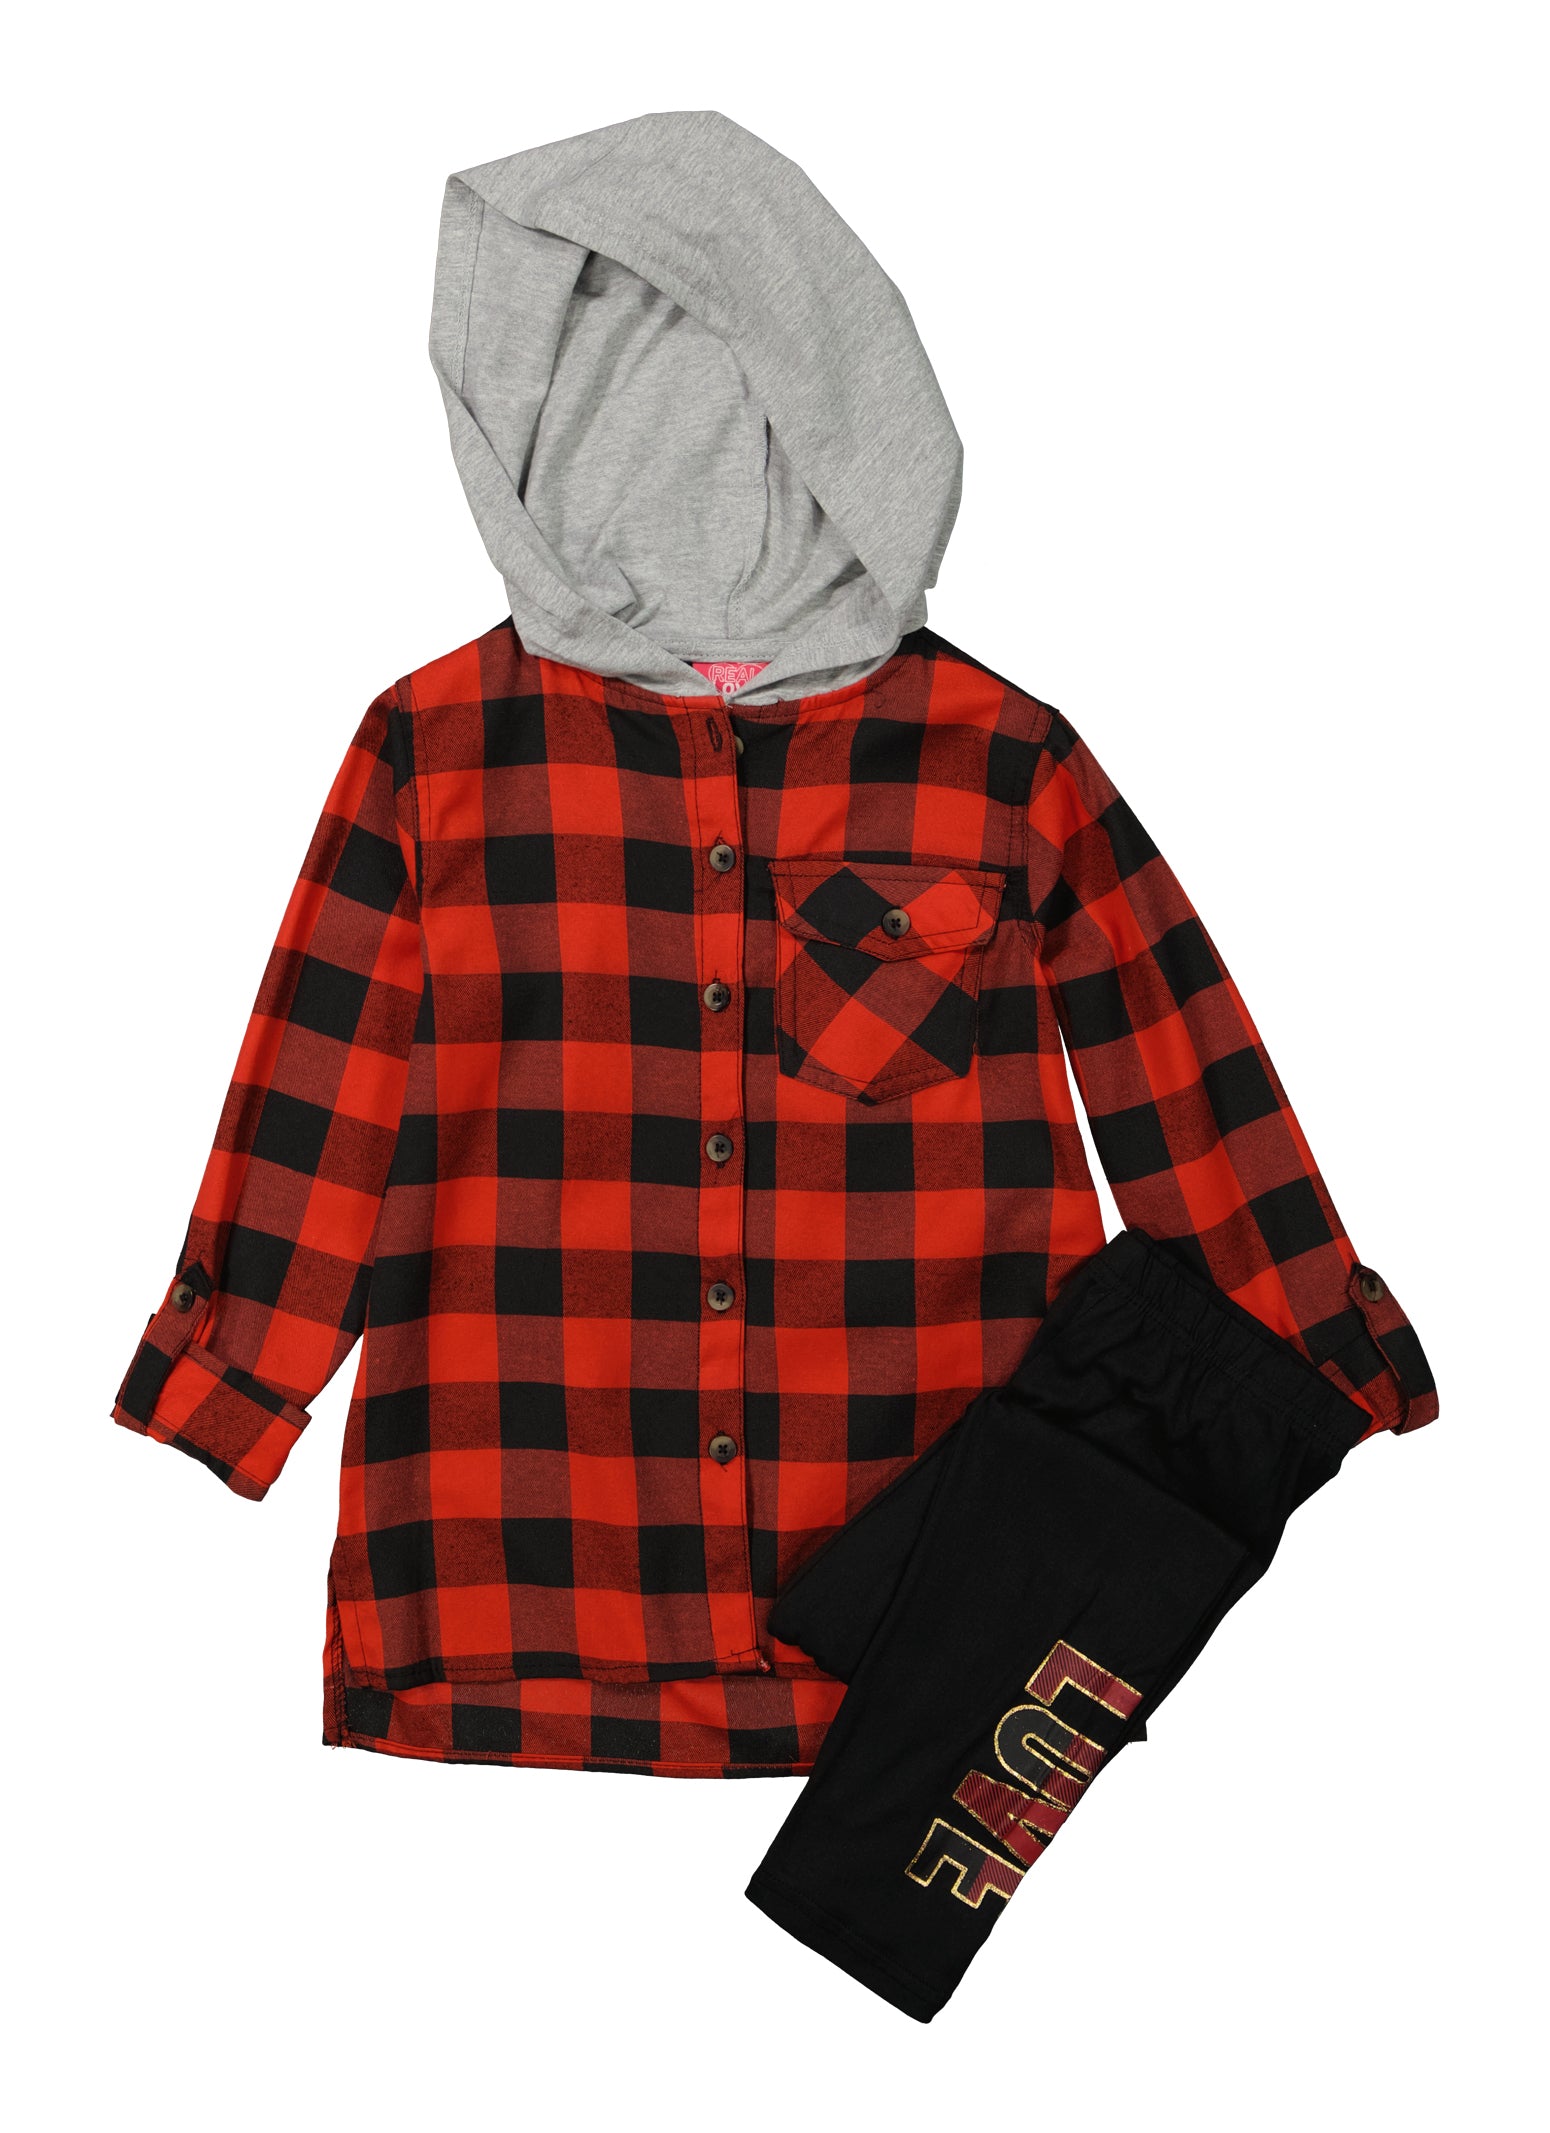 Girls Plaid Hooded Shirt and Graphic Leggings, Red, Size 7-8